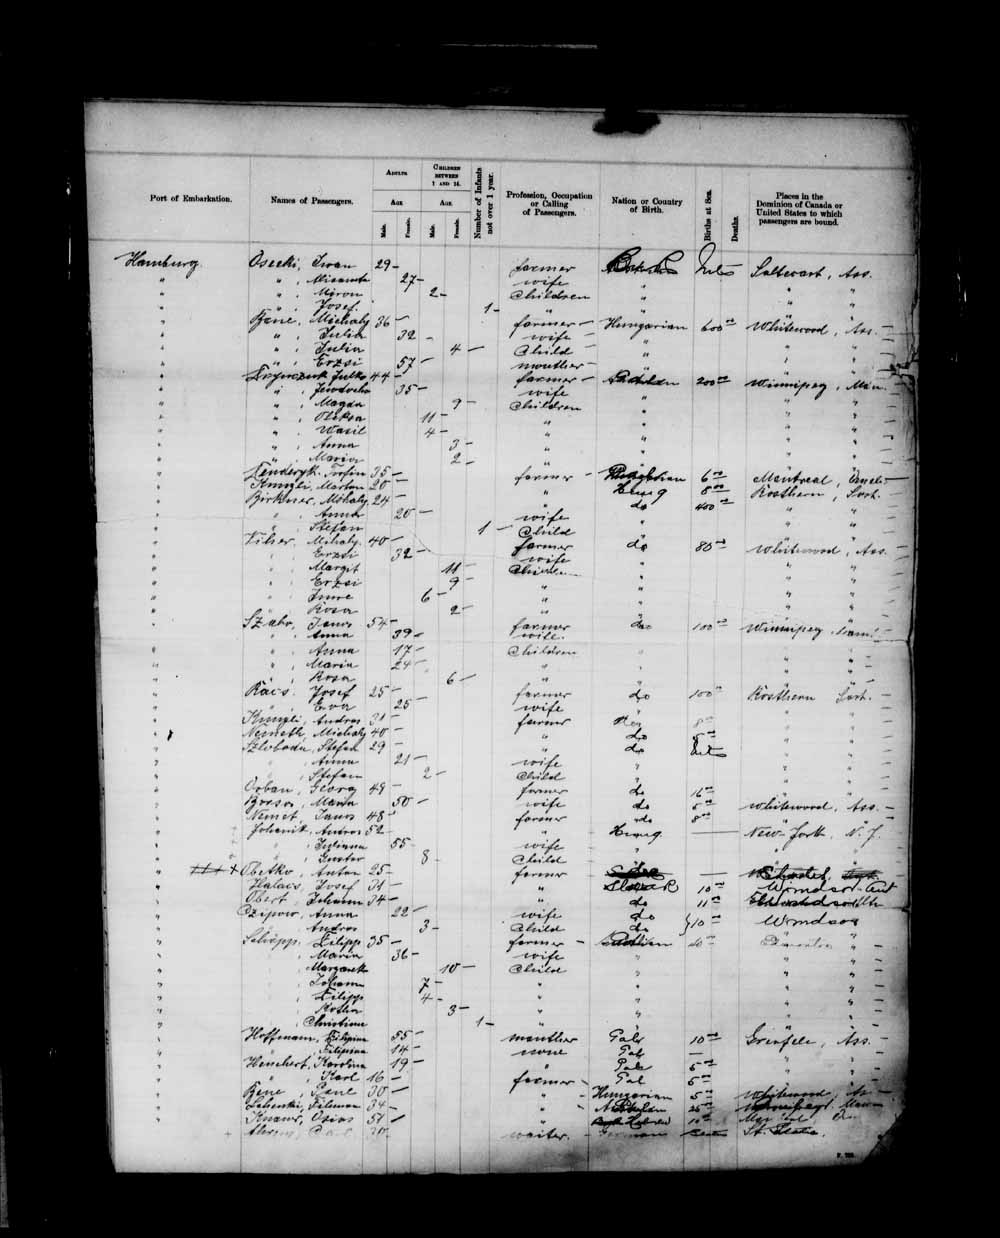 Digitized page of Passenger Lists for Image No.: e003691367